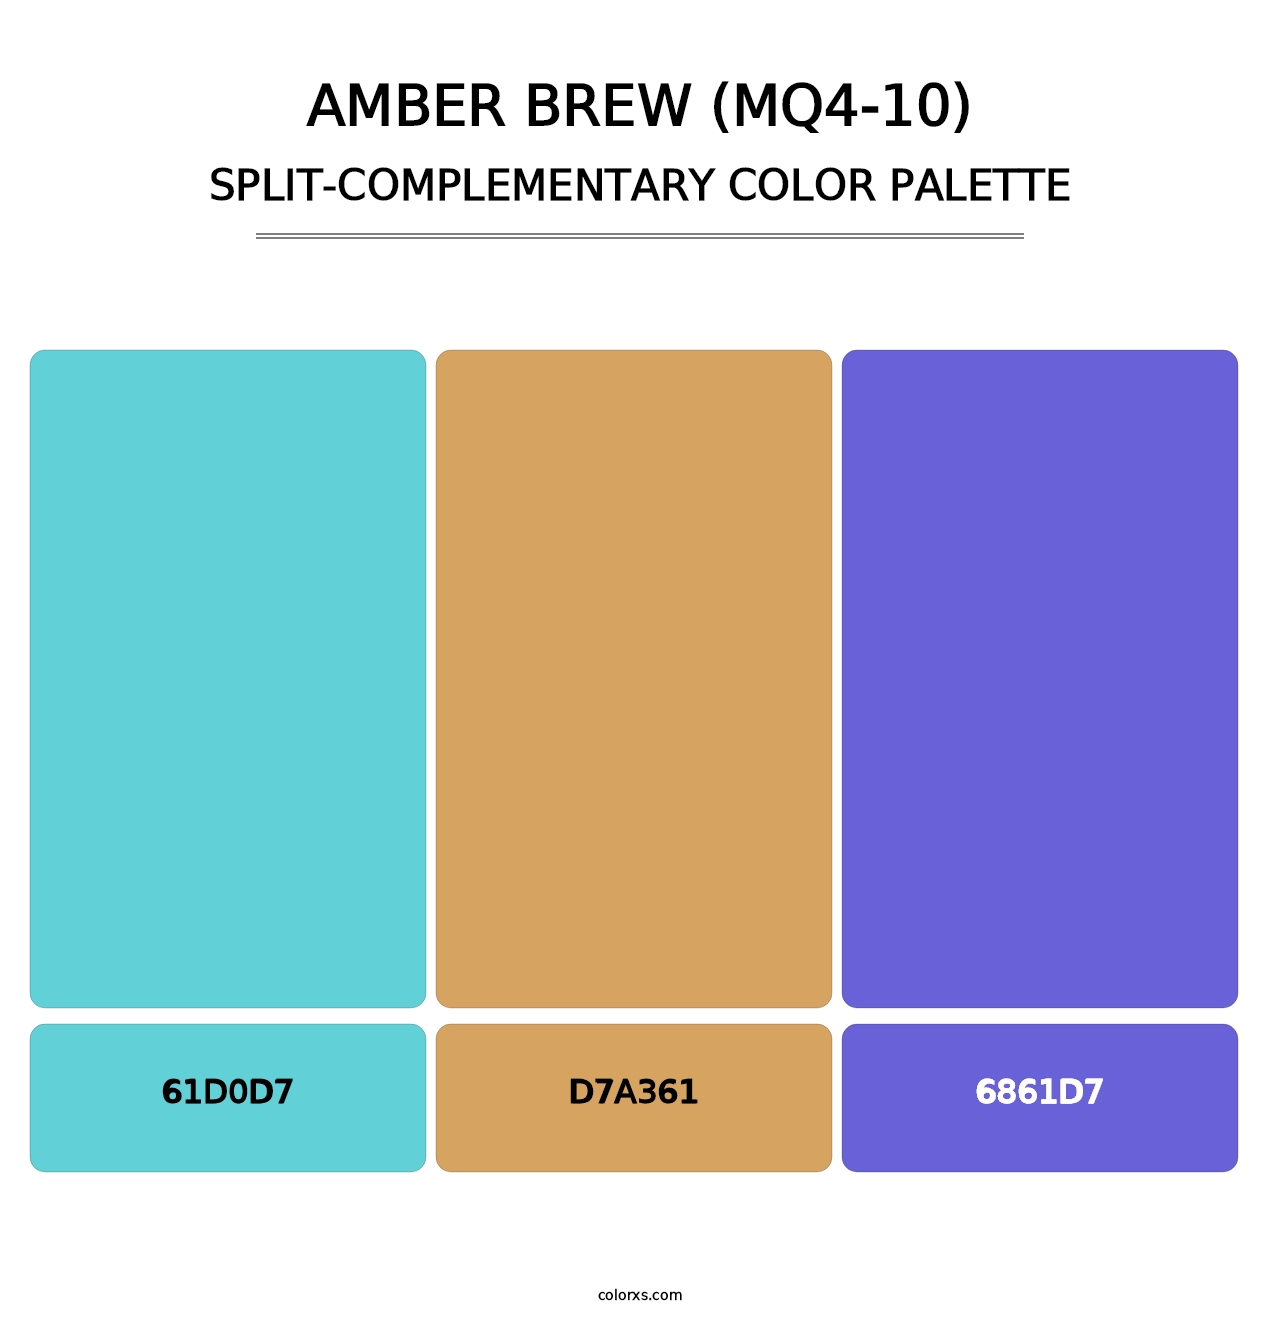 Amber Brew (MQ4-10) - Split-Complementary Color Palette